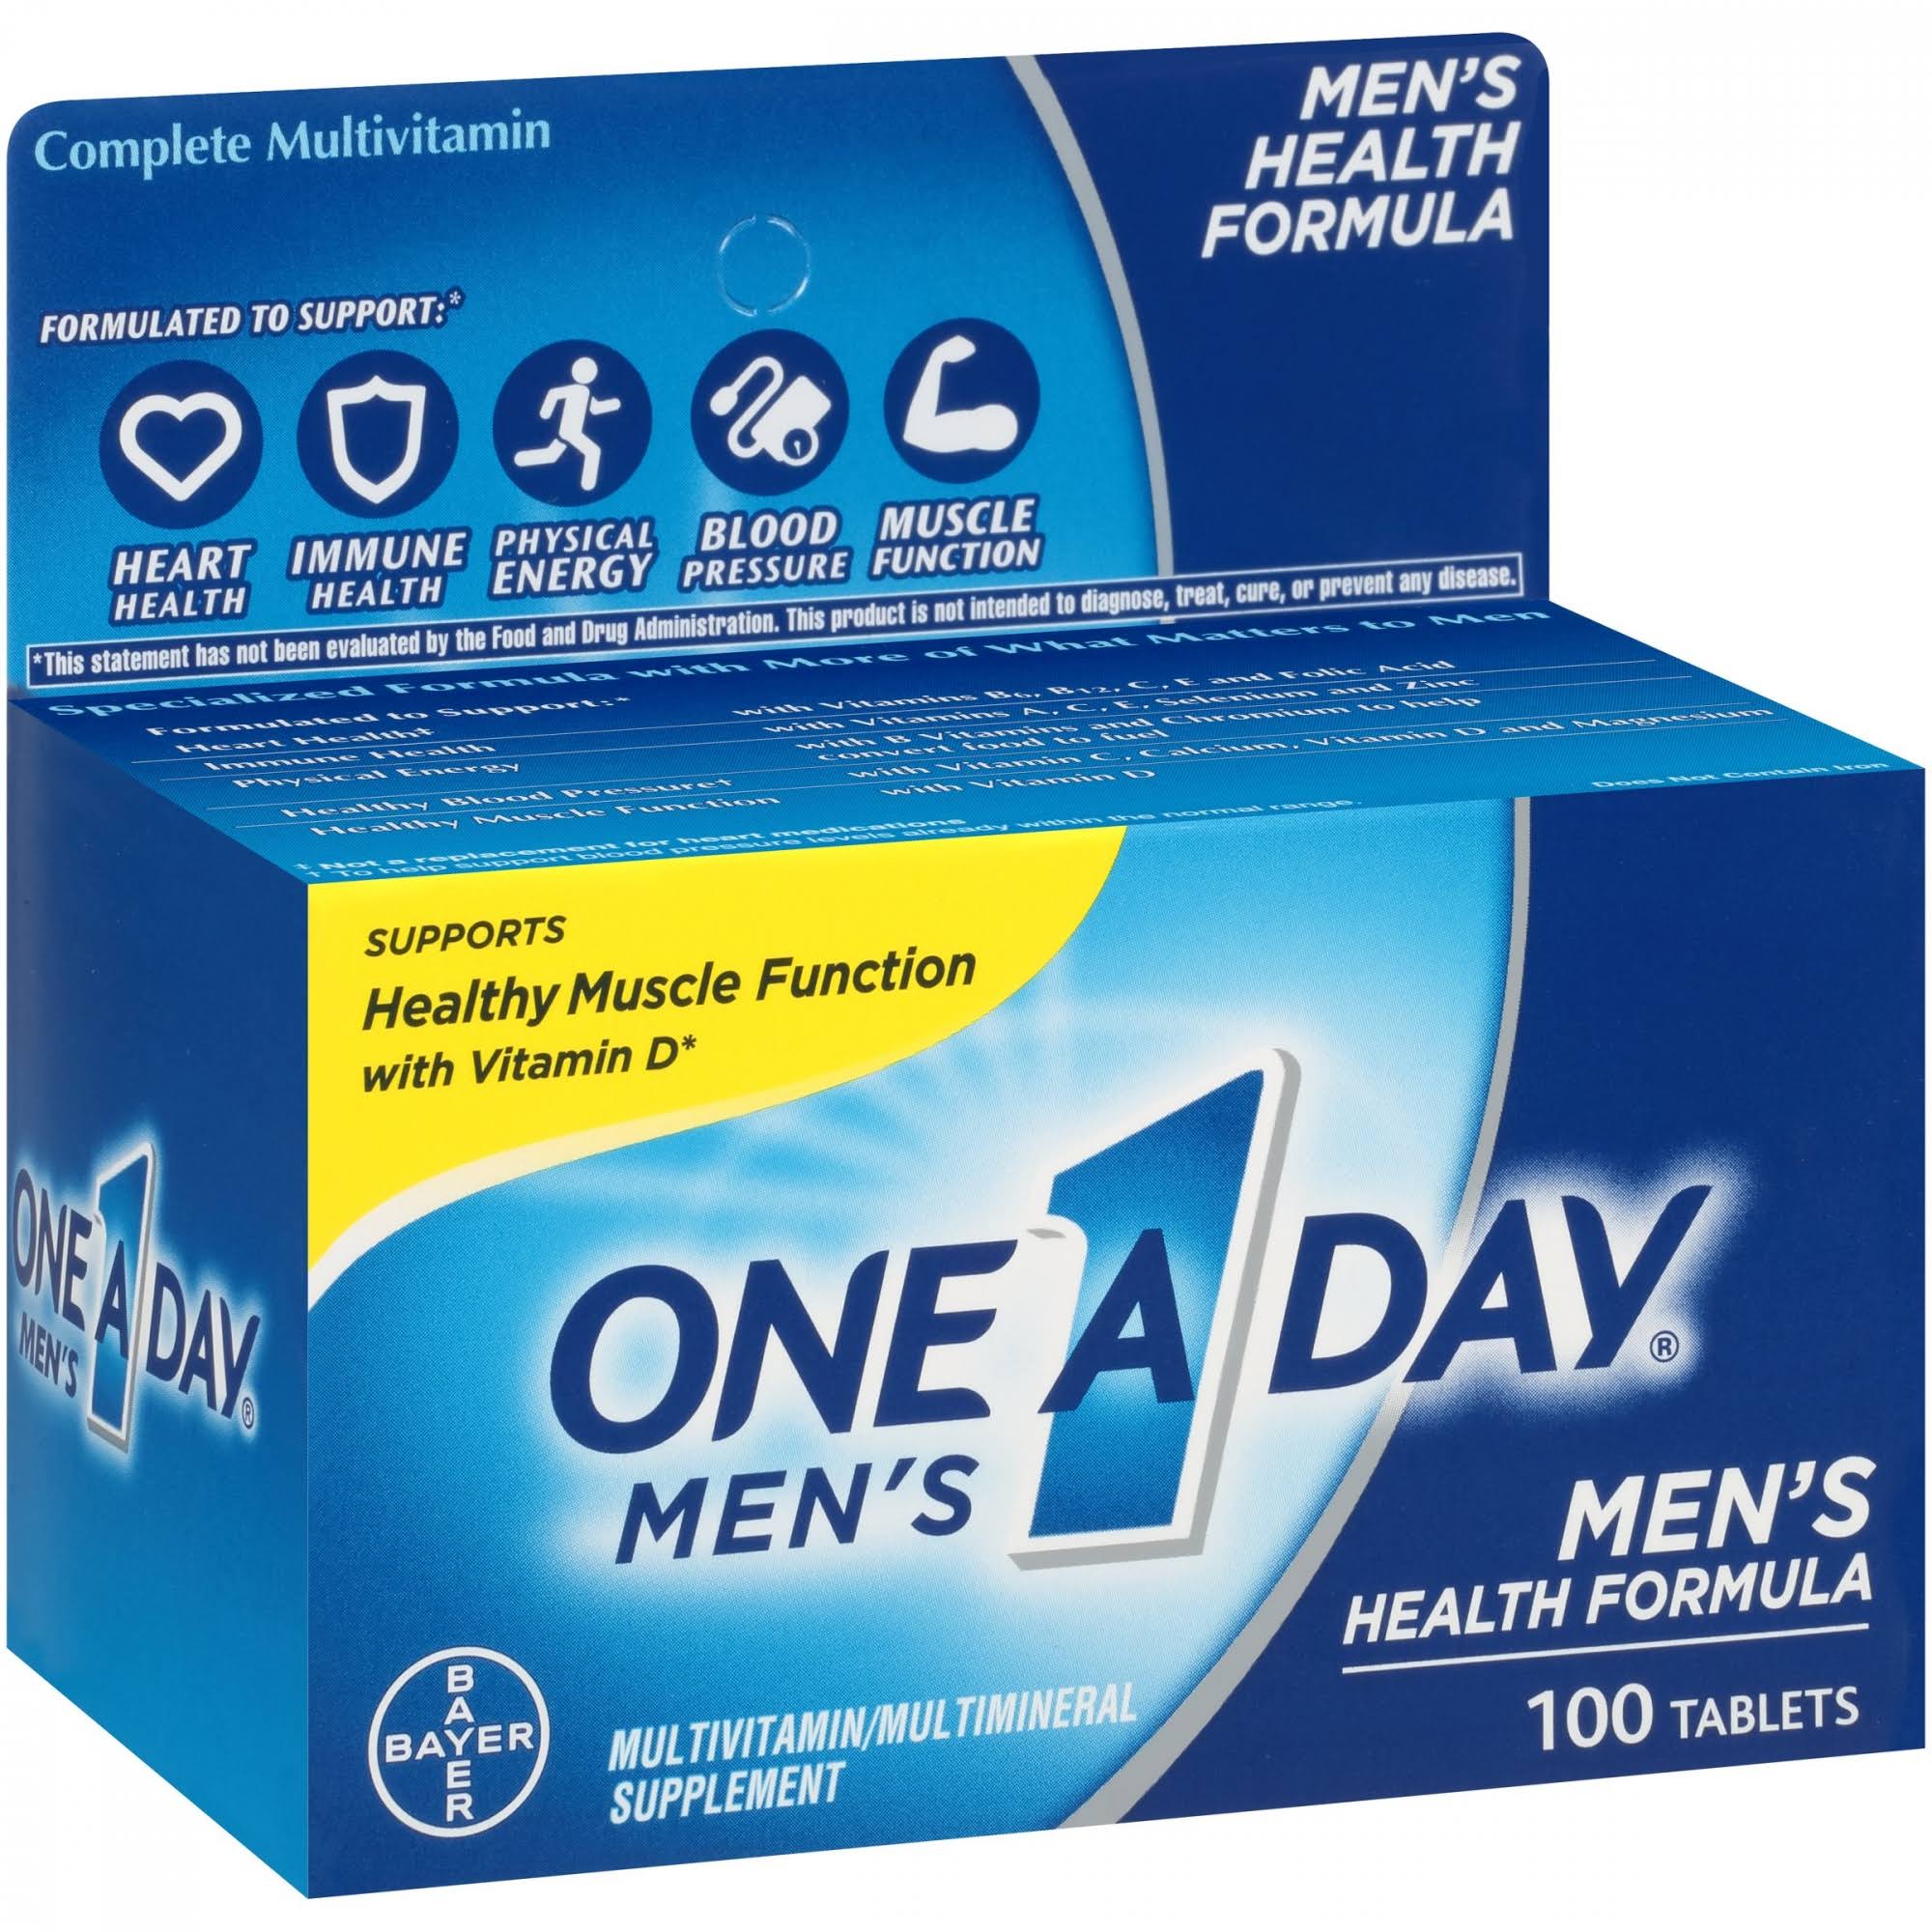 One-A-Day Men's Multivitamin Dietary Supplement - 100 Tablets